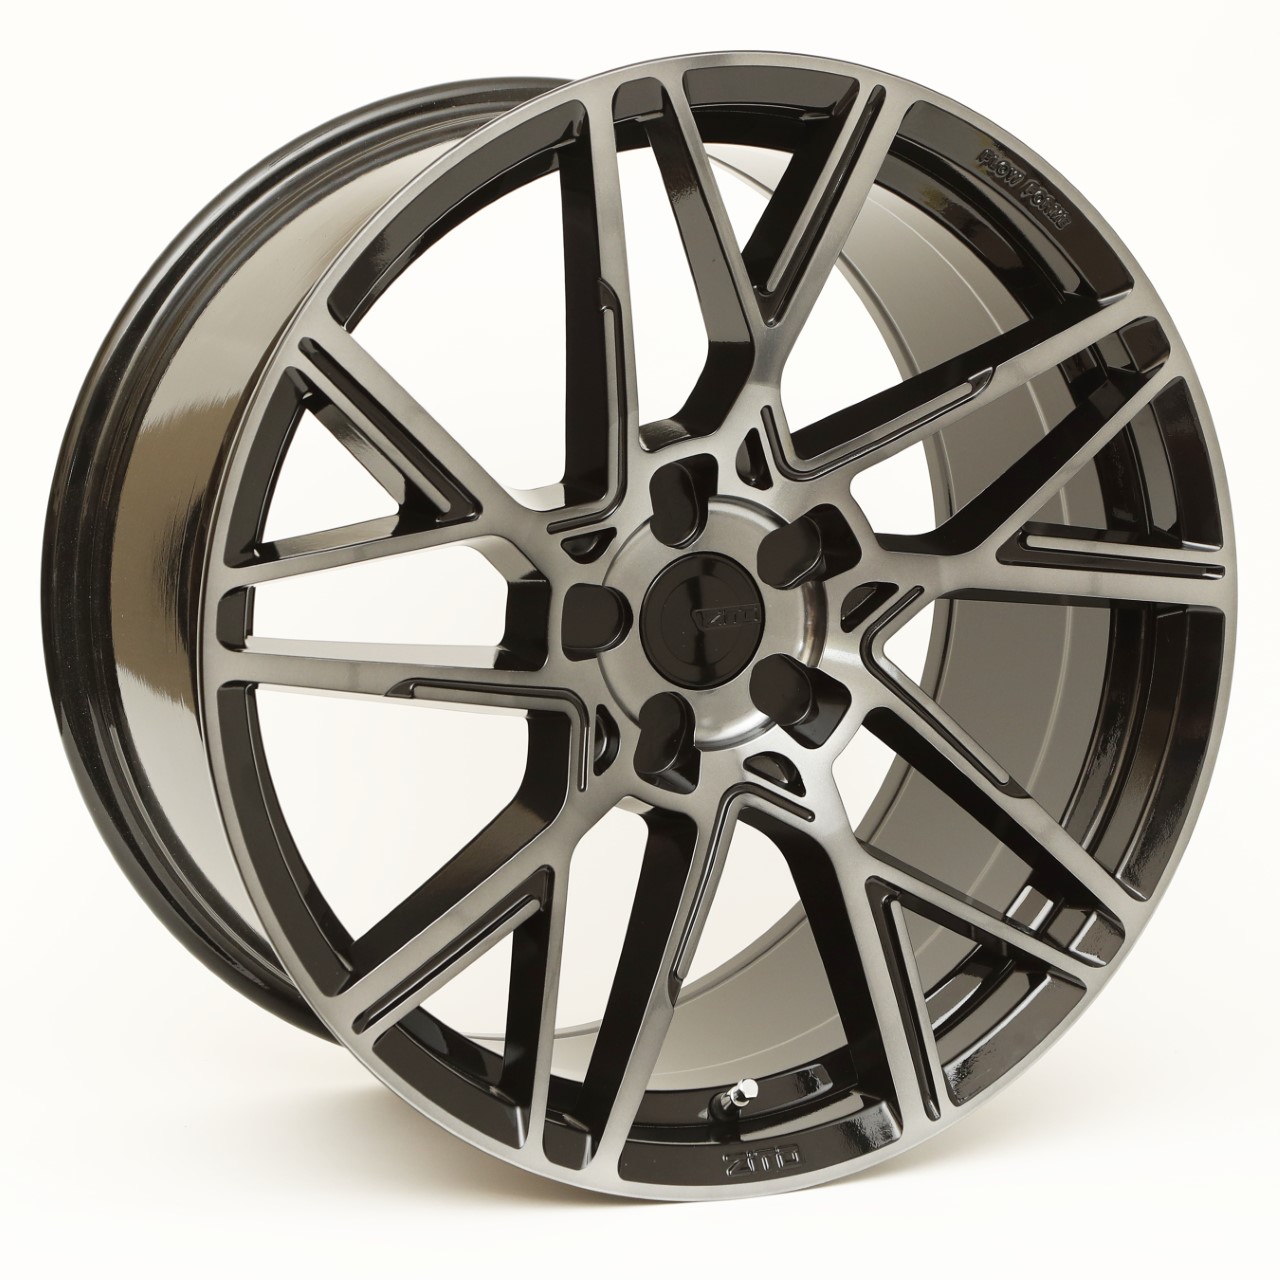 NEW 19" ZITO ZF-X FLOW FORMED ALLOY WHEELS IN GLOSS BLACK WITH POLISHED FACE WITH DEEPER CONCAVE 9.5" REAR